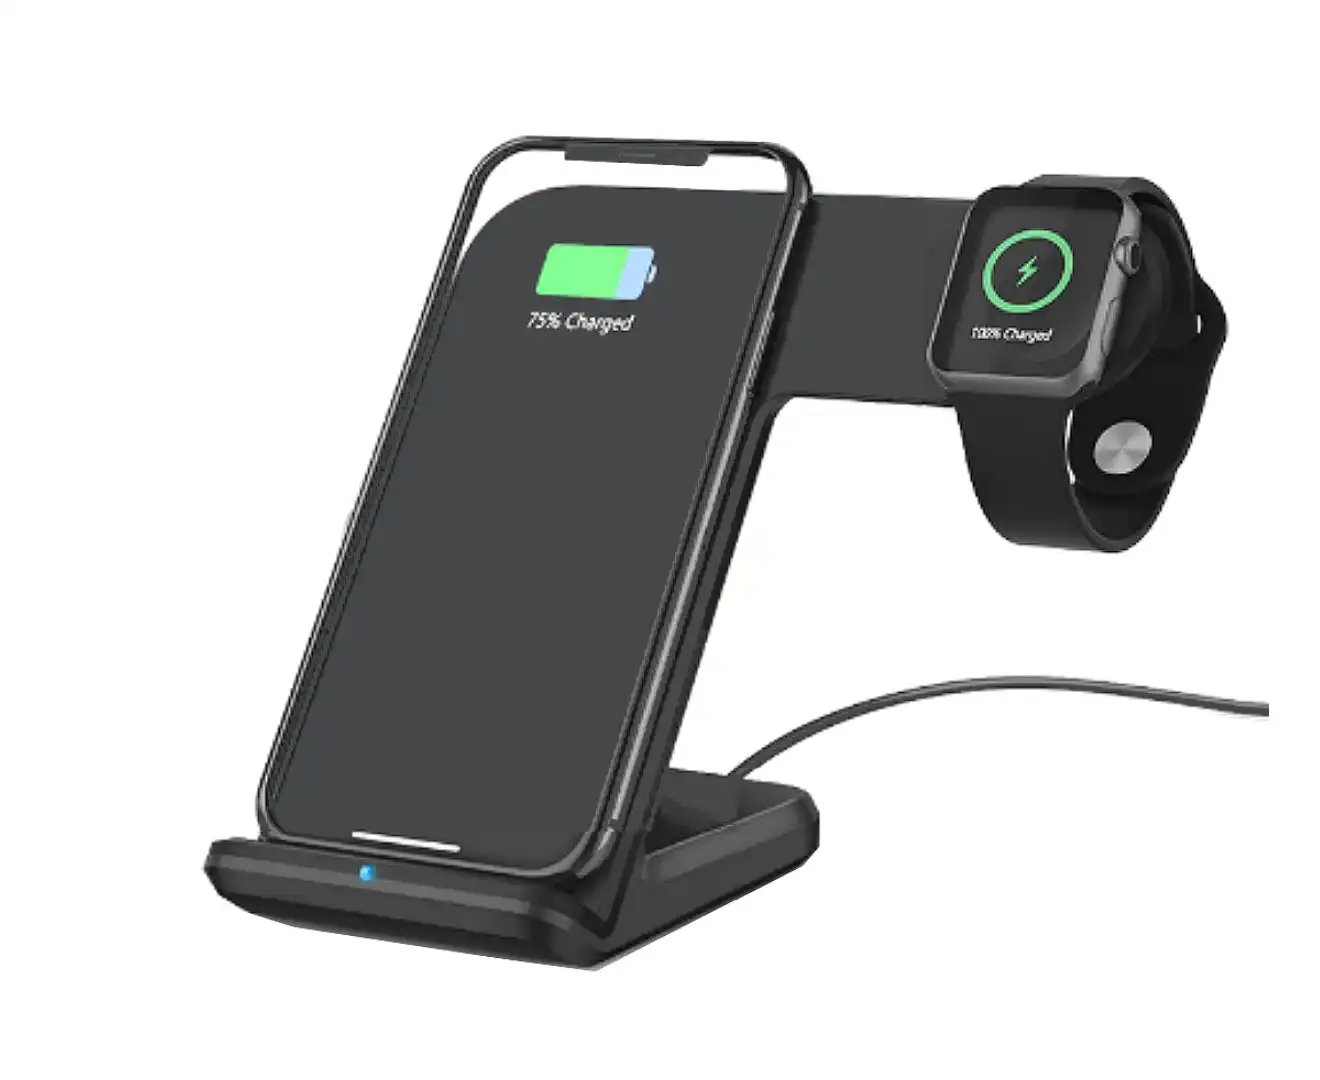 10W 2-in-1 Dual Wireless Charging Dock Made for Apple (including Apple Watch) Black